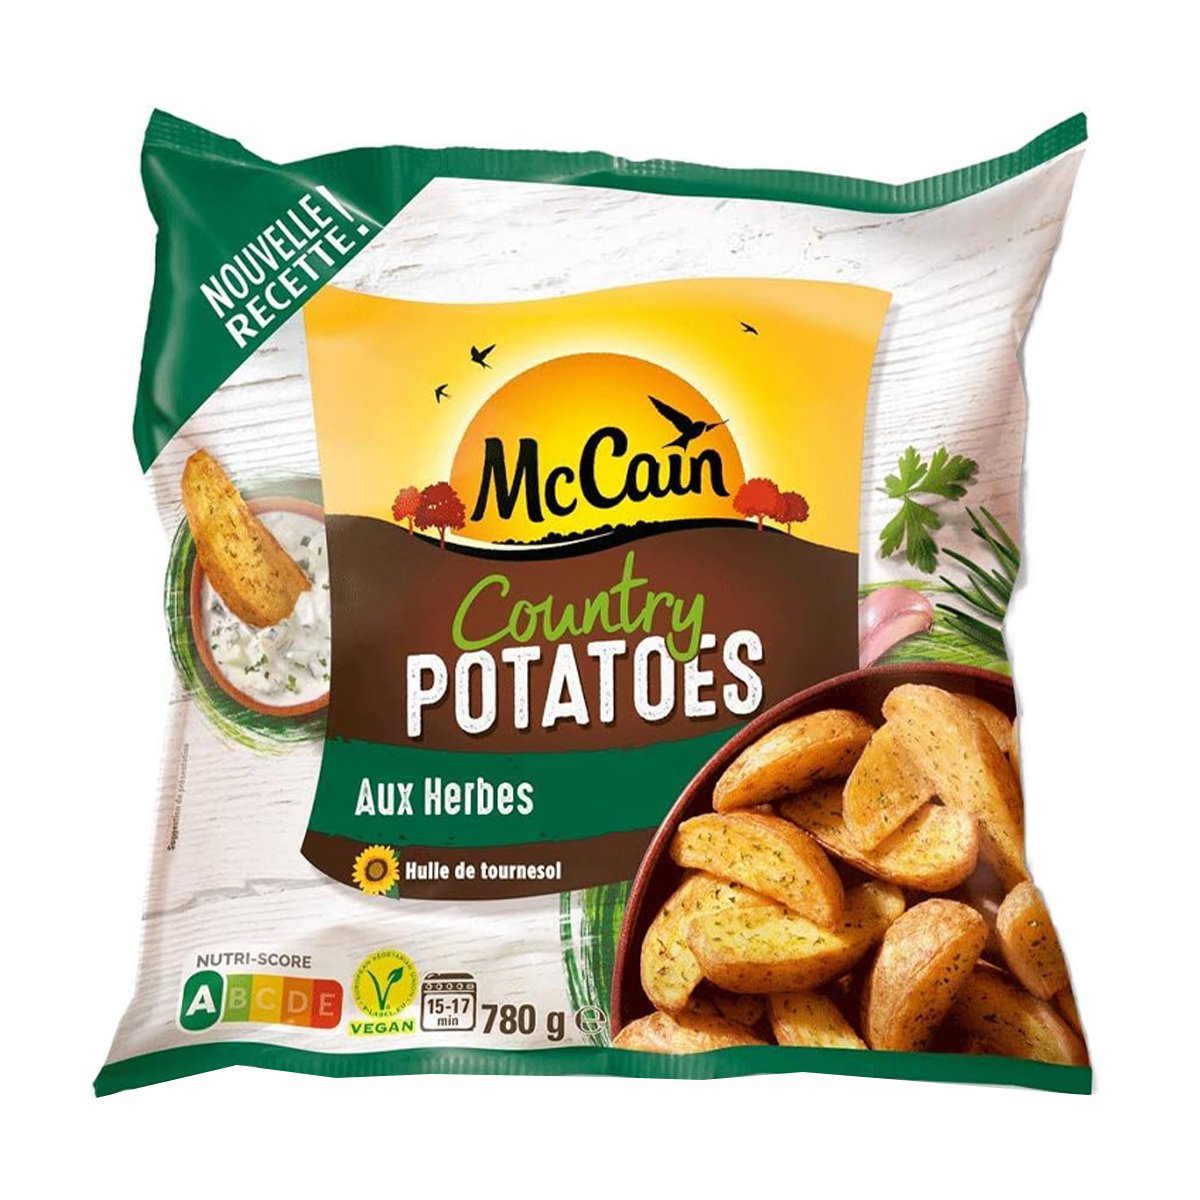 McCain Country Potatoes Aux Herbes Value Pack 2 x 780 g